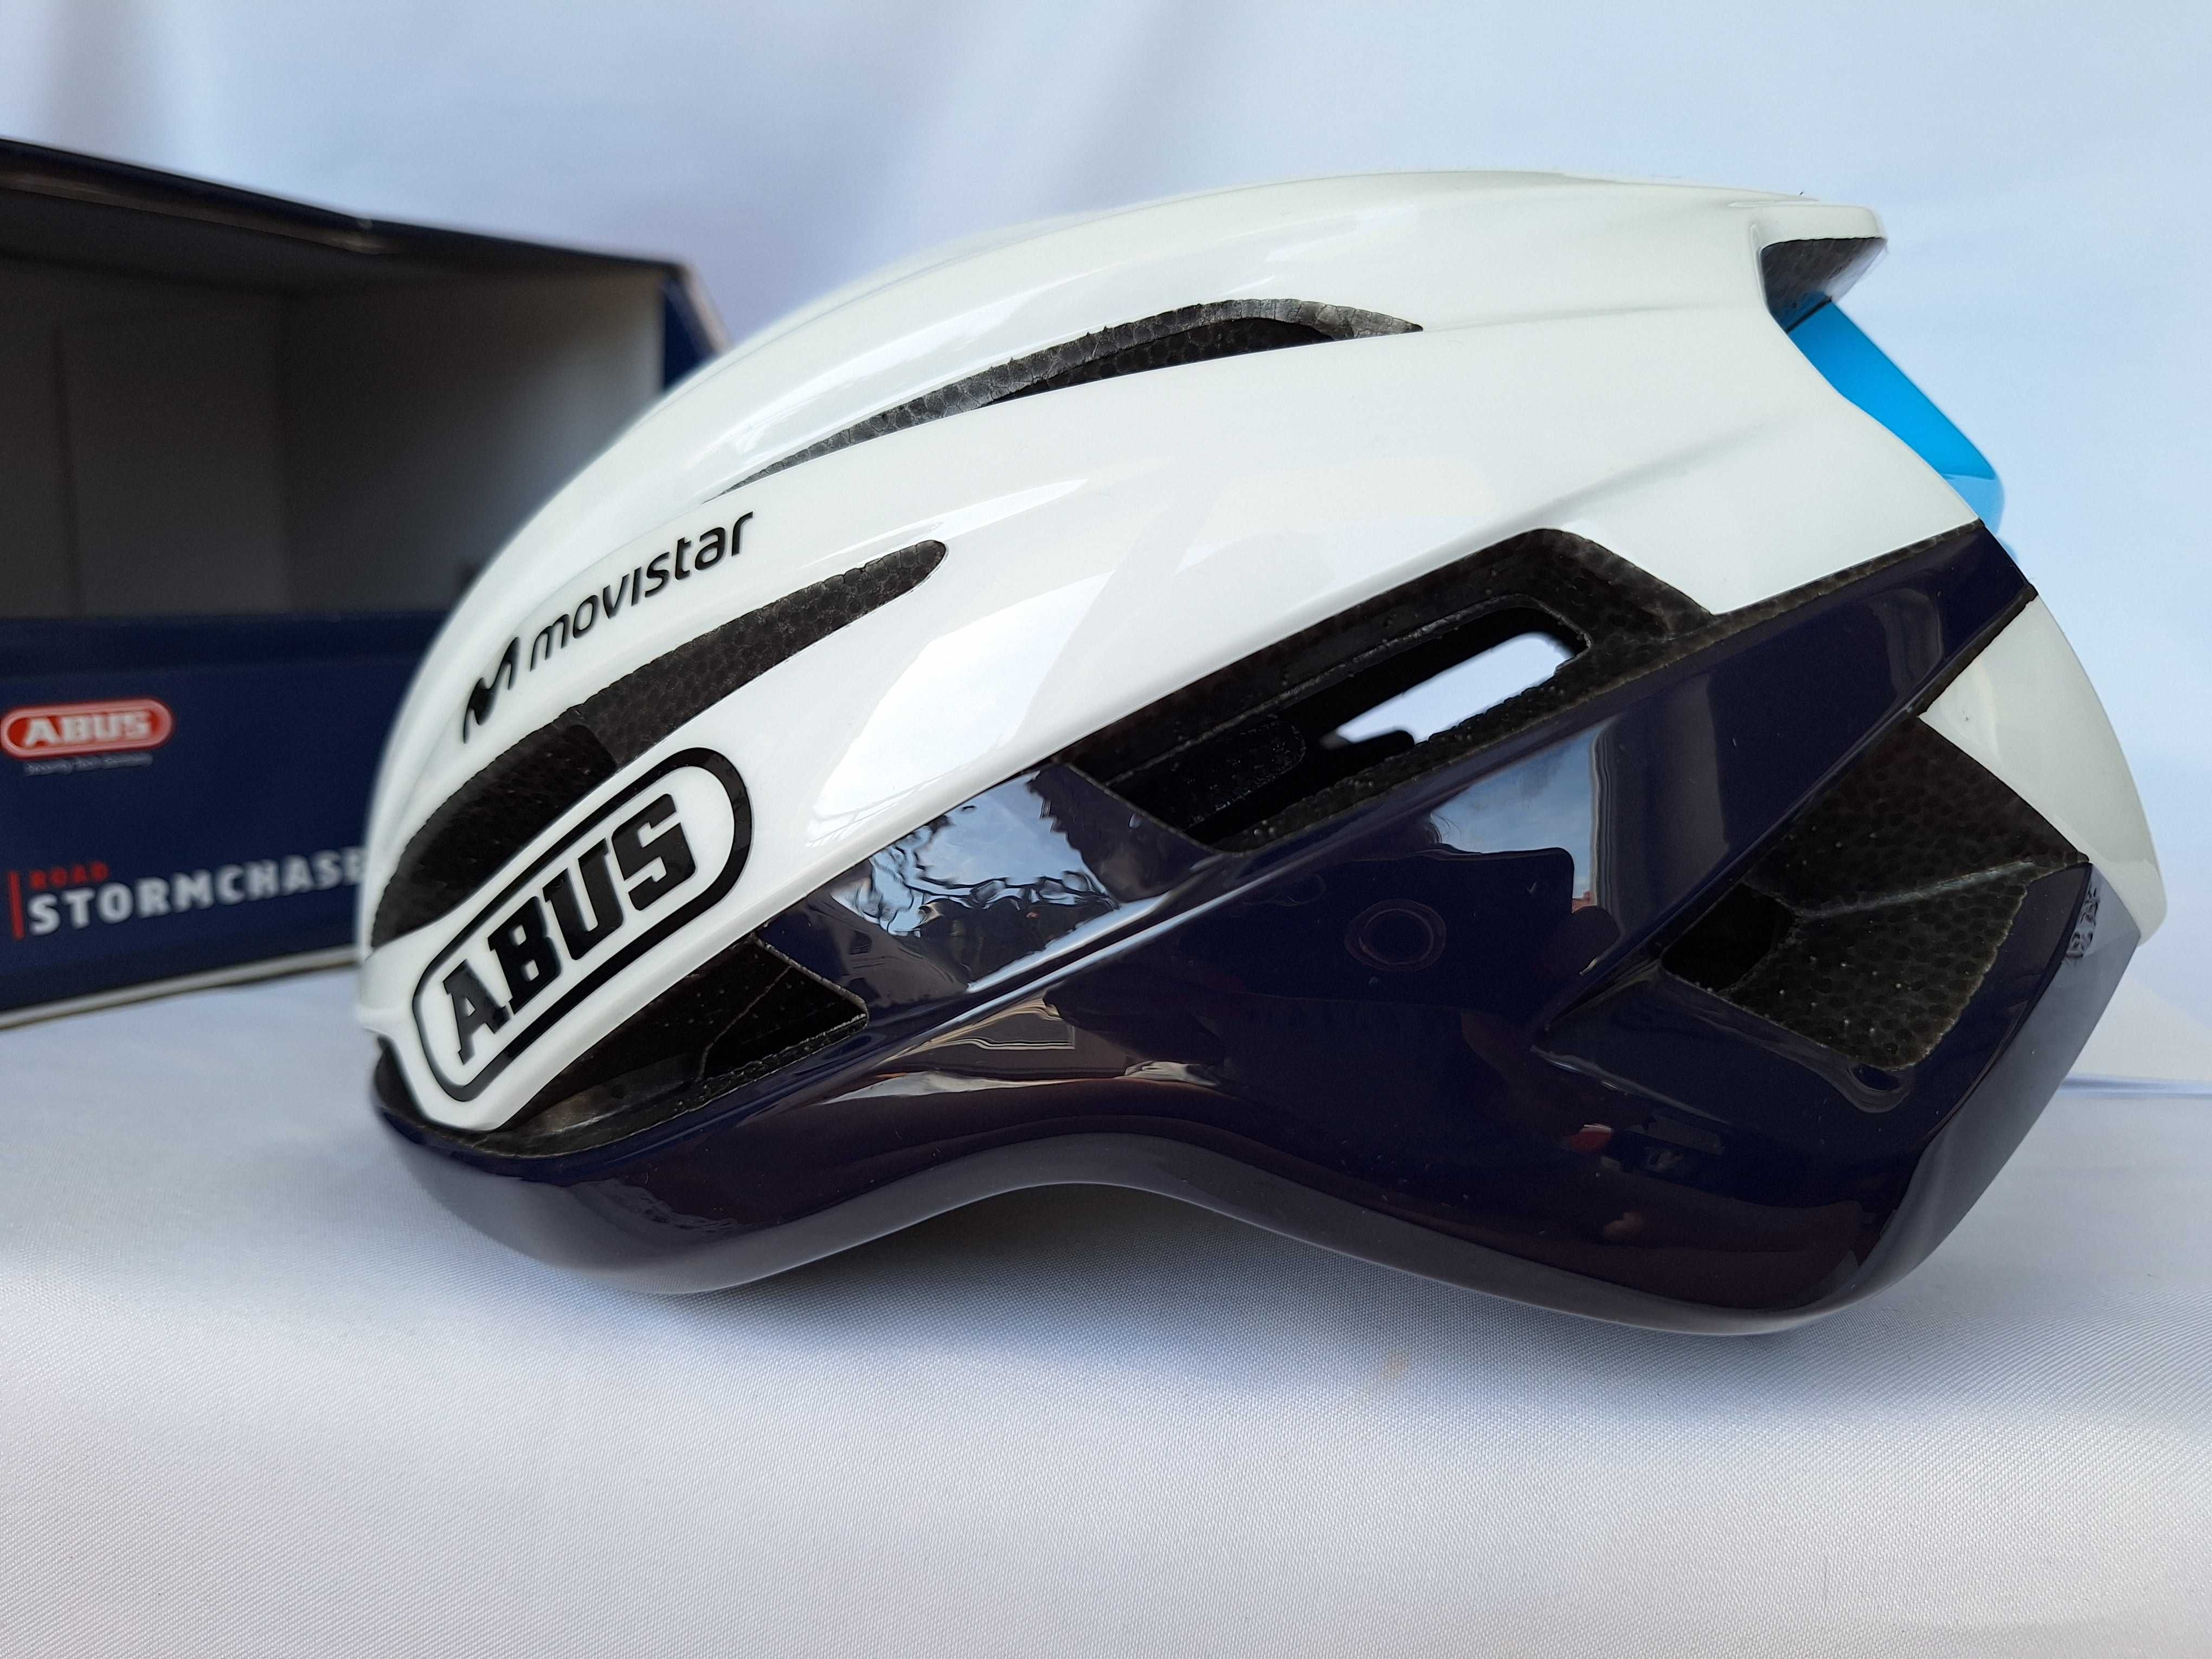 Kask rowerowy Abus StormChaser Movistar Team M 54-58cm